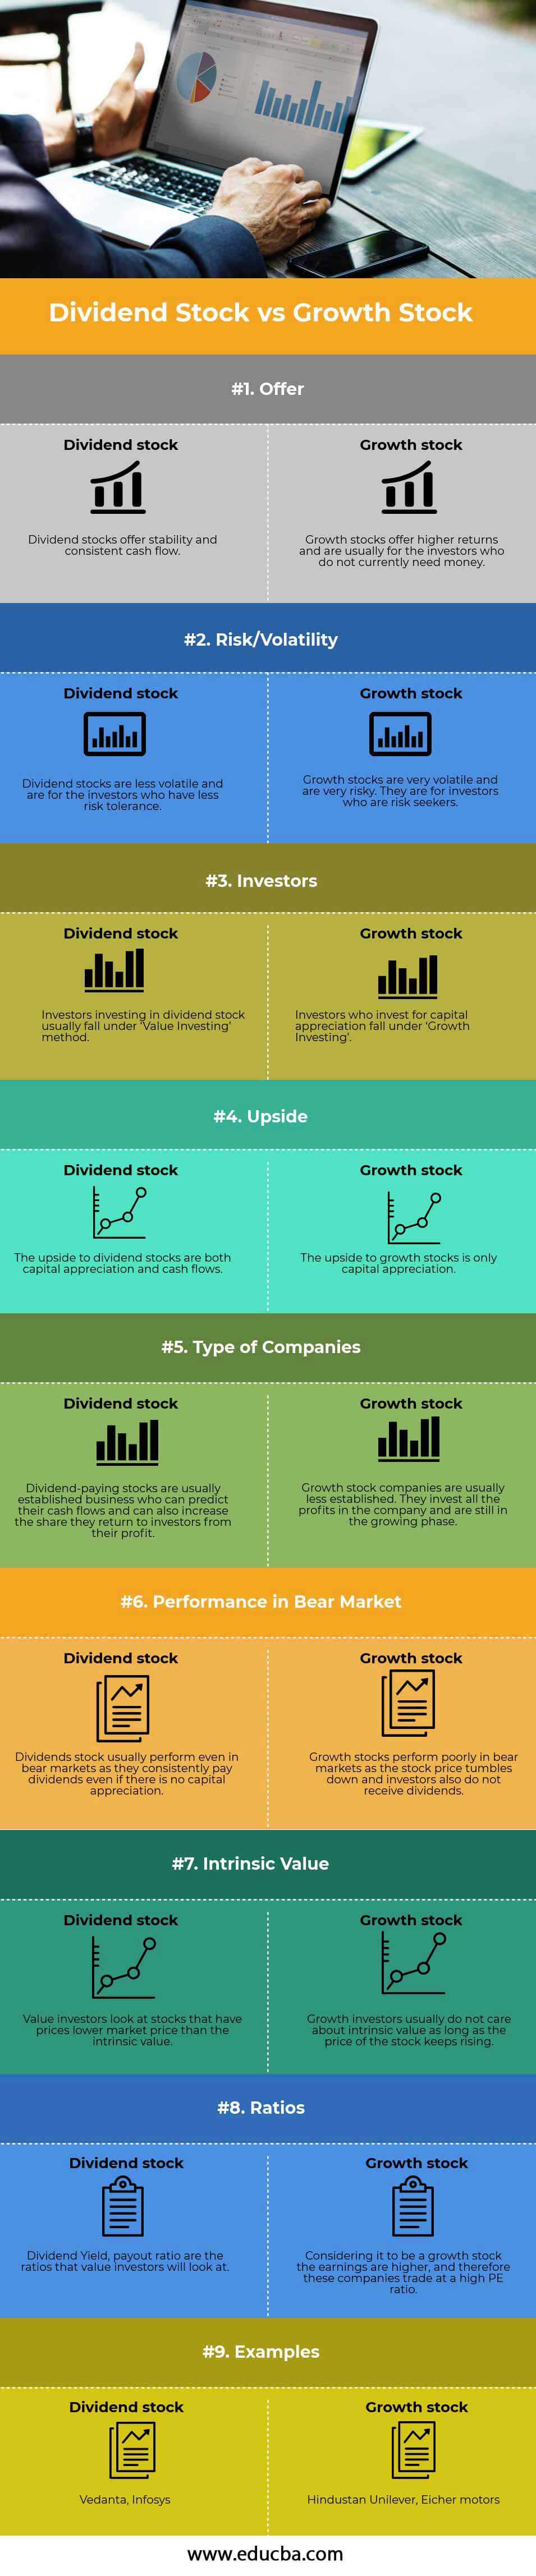 Dividend-Stock-vs-Growth-Stock info